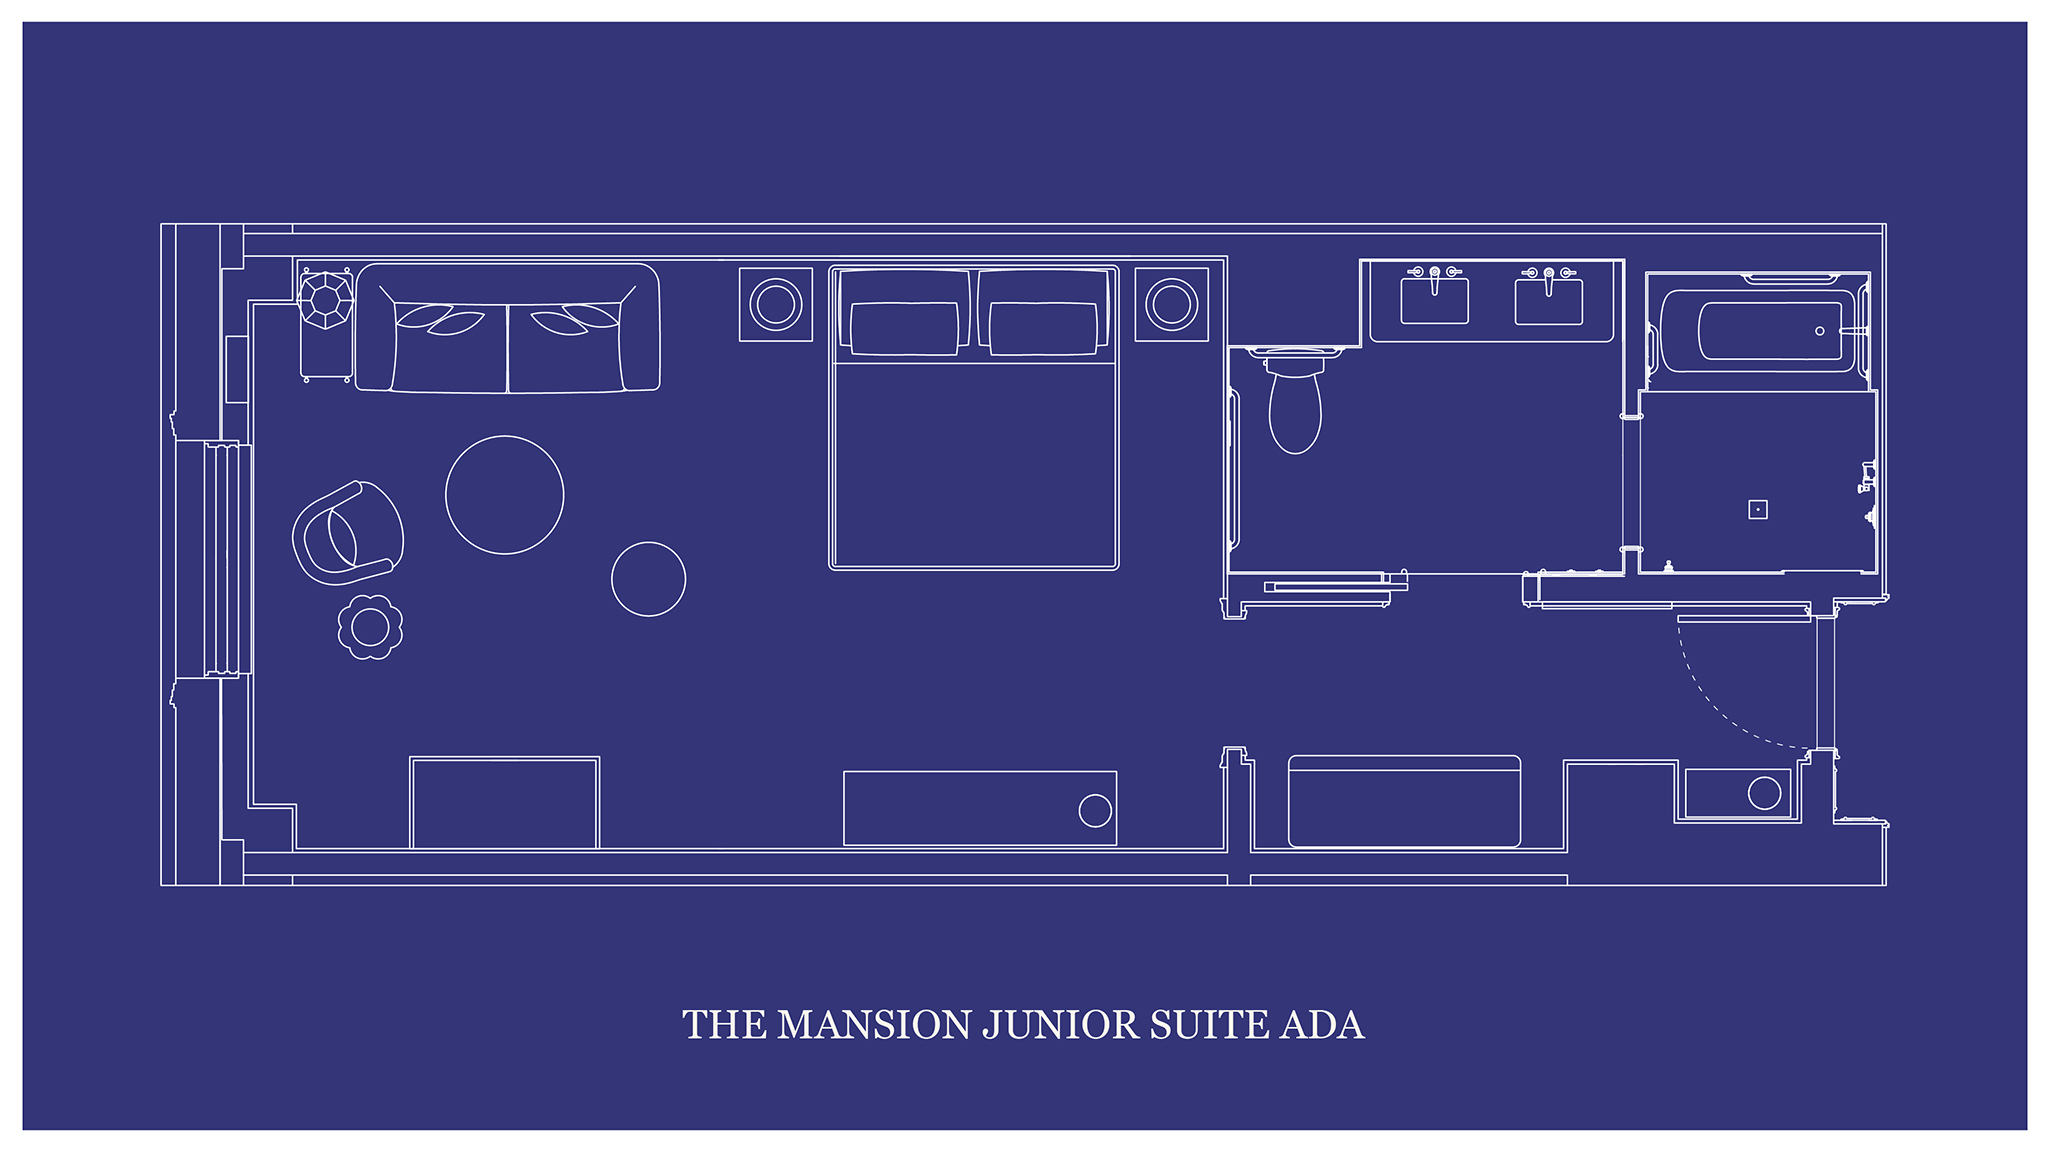 Blueprint map of "THE MANSION JUNIOR SUITE ADA" rendered in intricate detail and design.